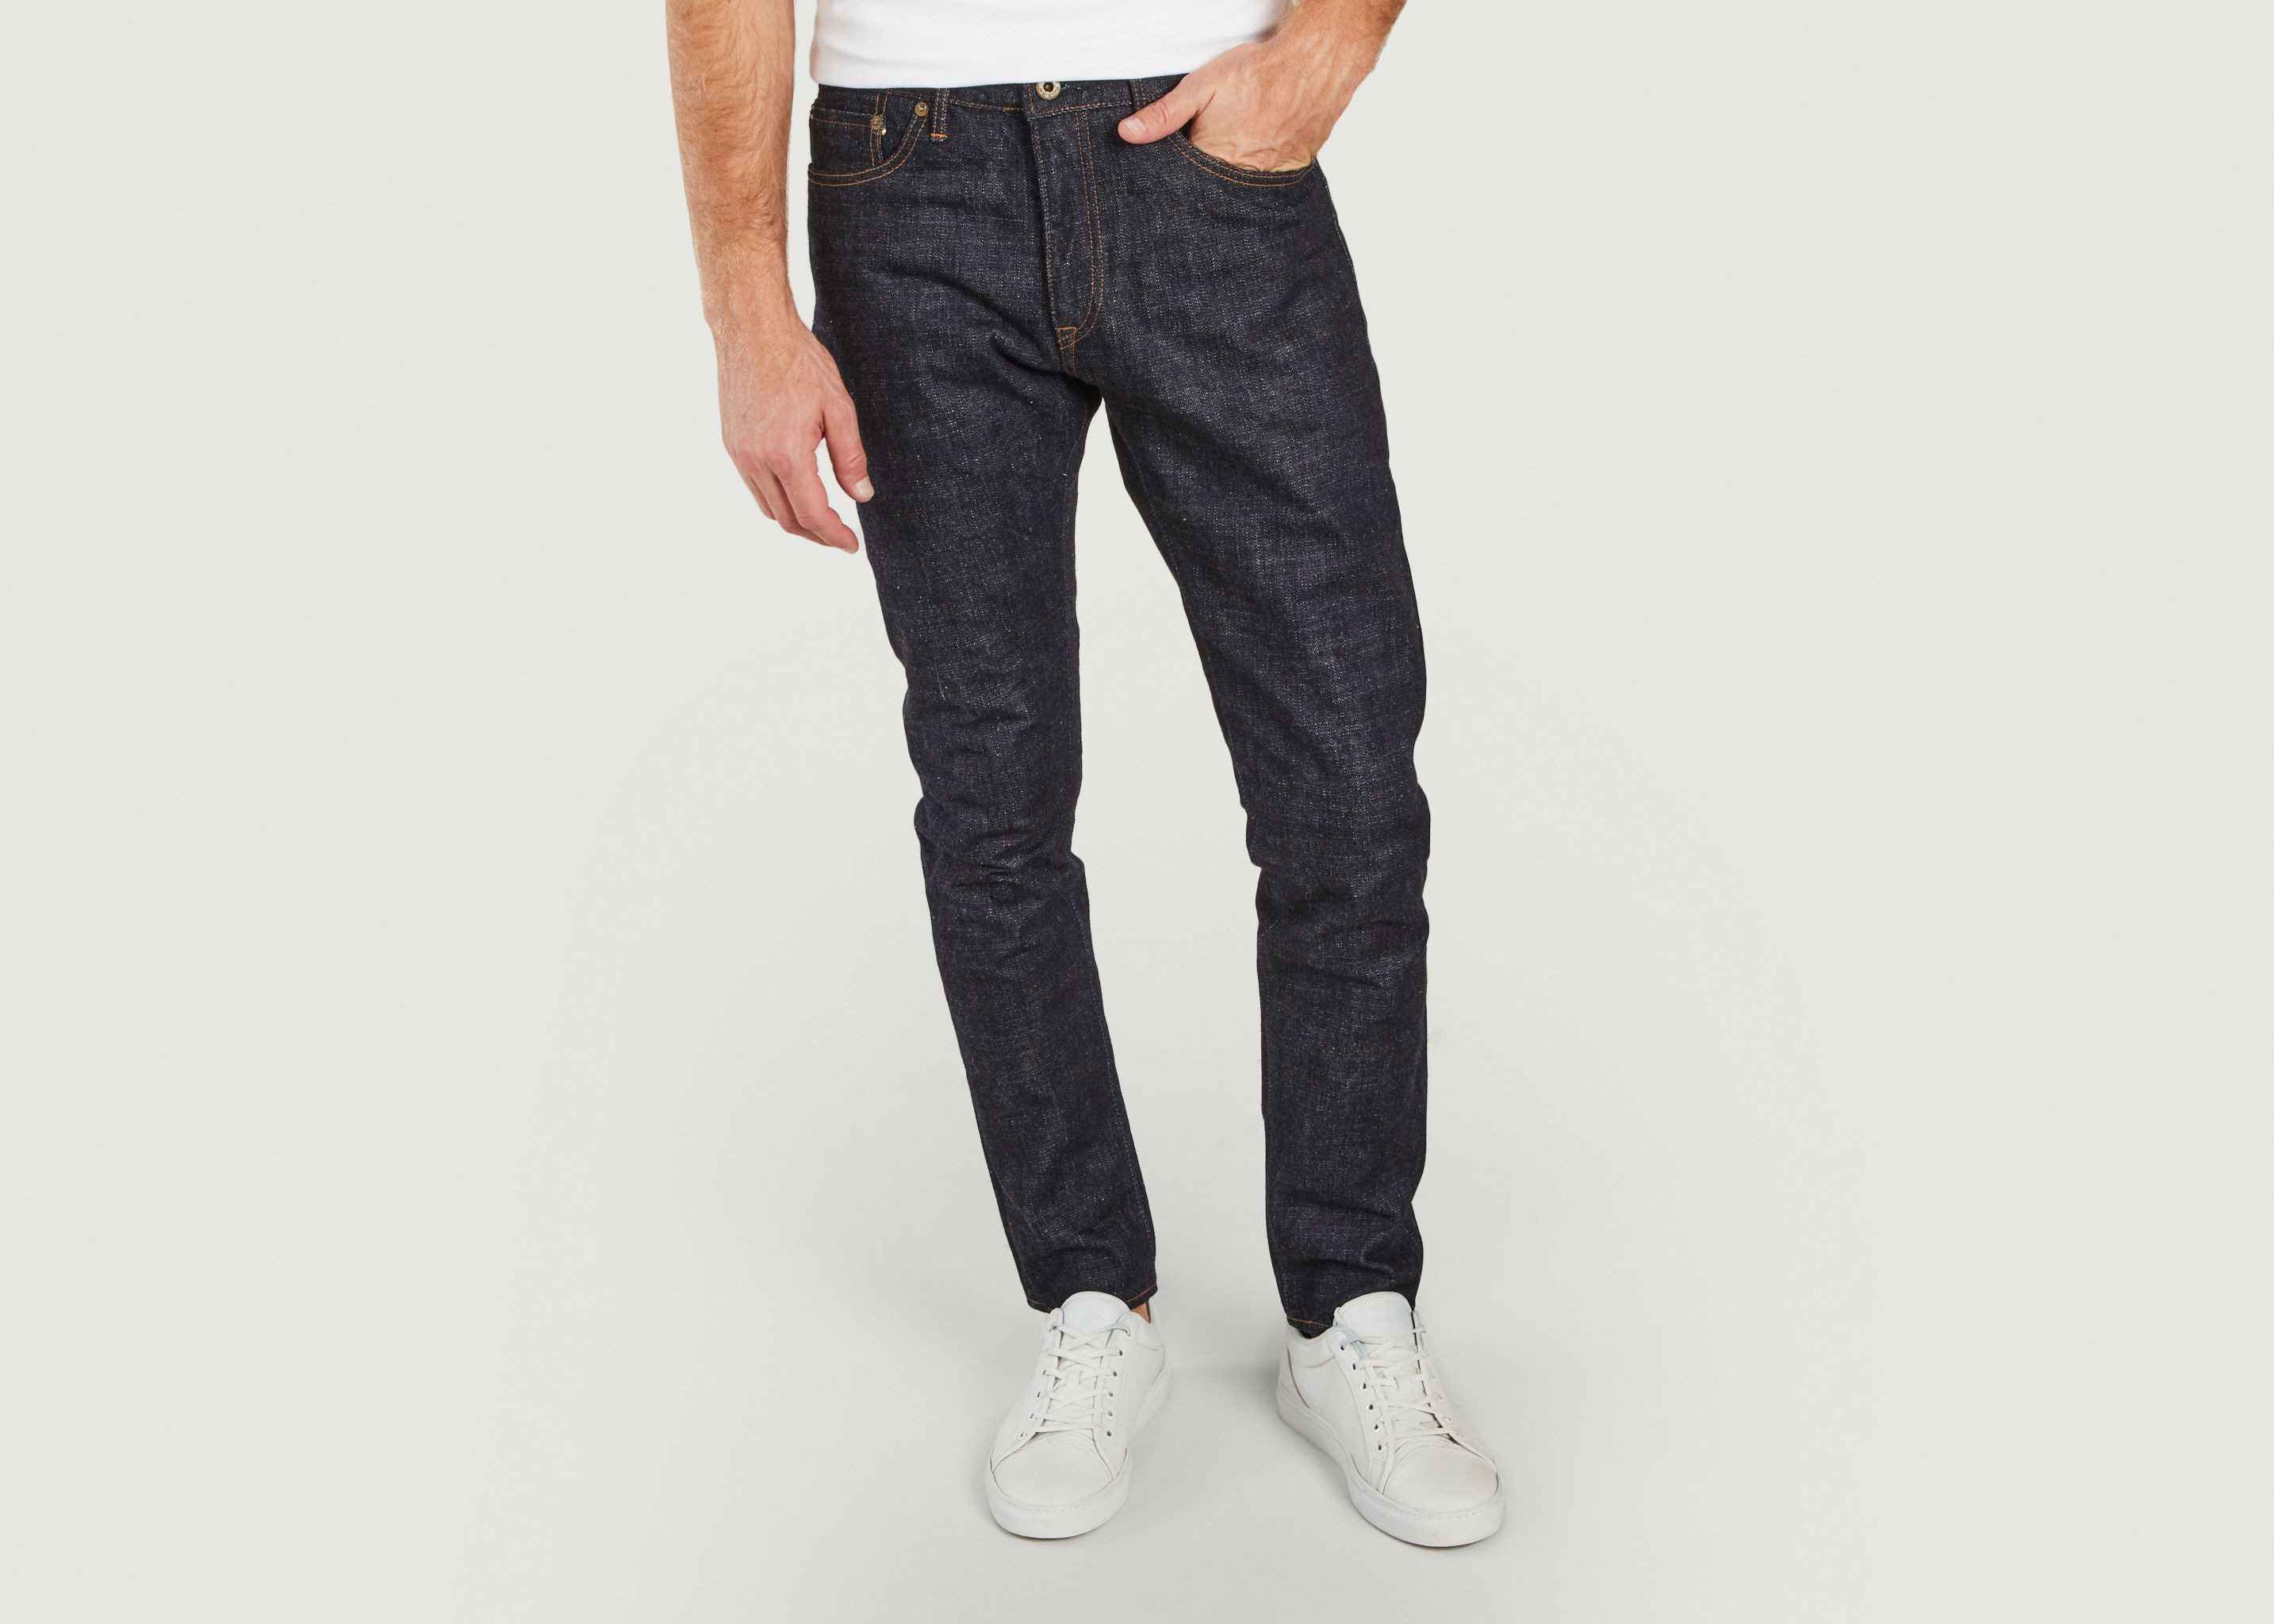 Circle selvedge tapered gross jeans - Japan Blue Jeans